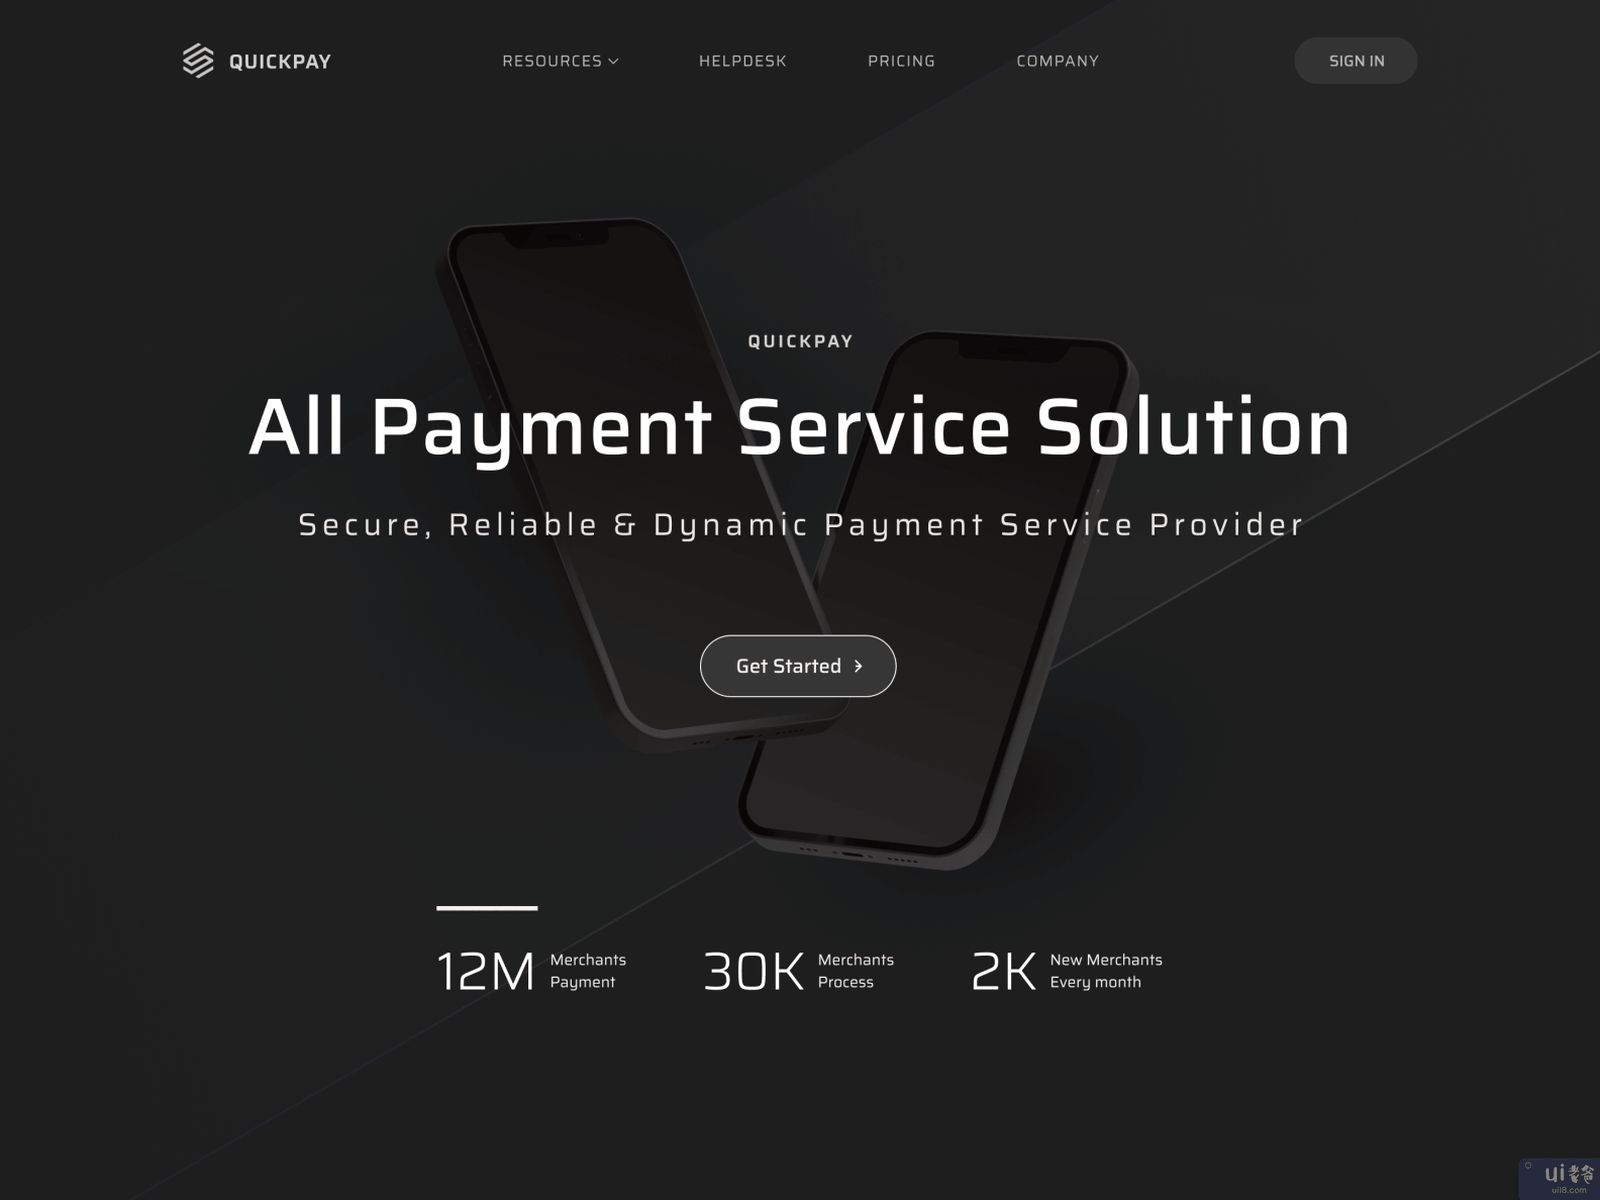 Quickpay.net支付服务解决方案 - 网站重新设计概念(Quickpay.net Payment Service Solution - Website Redesign Concept)插图1